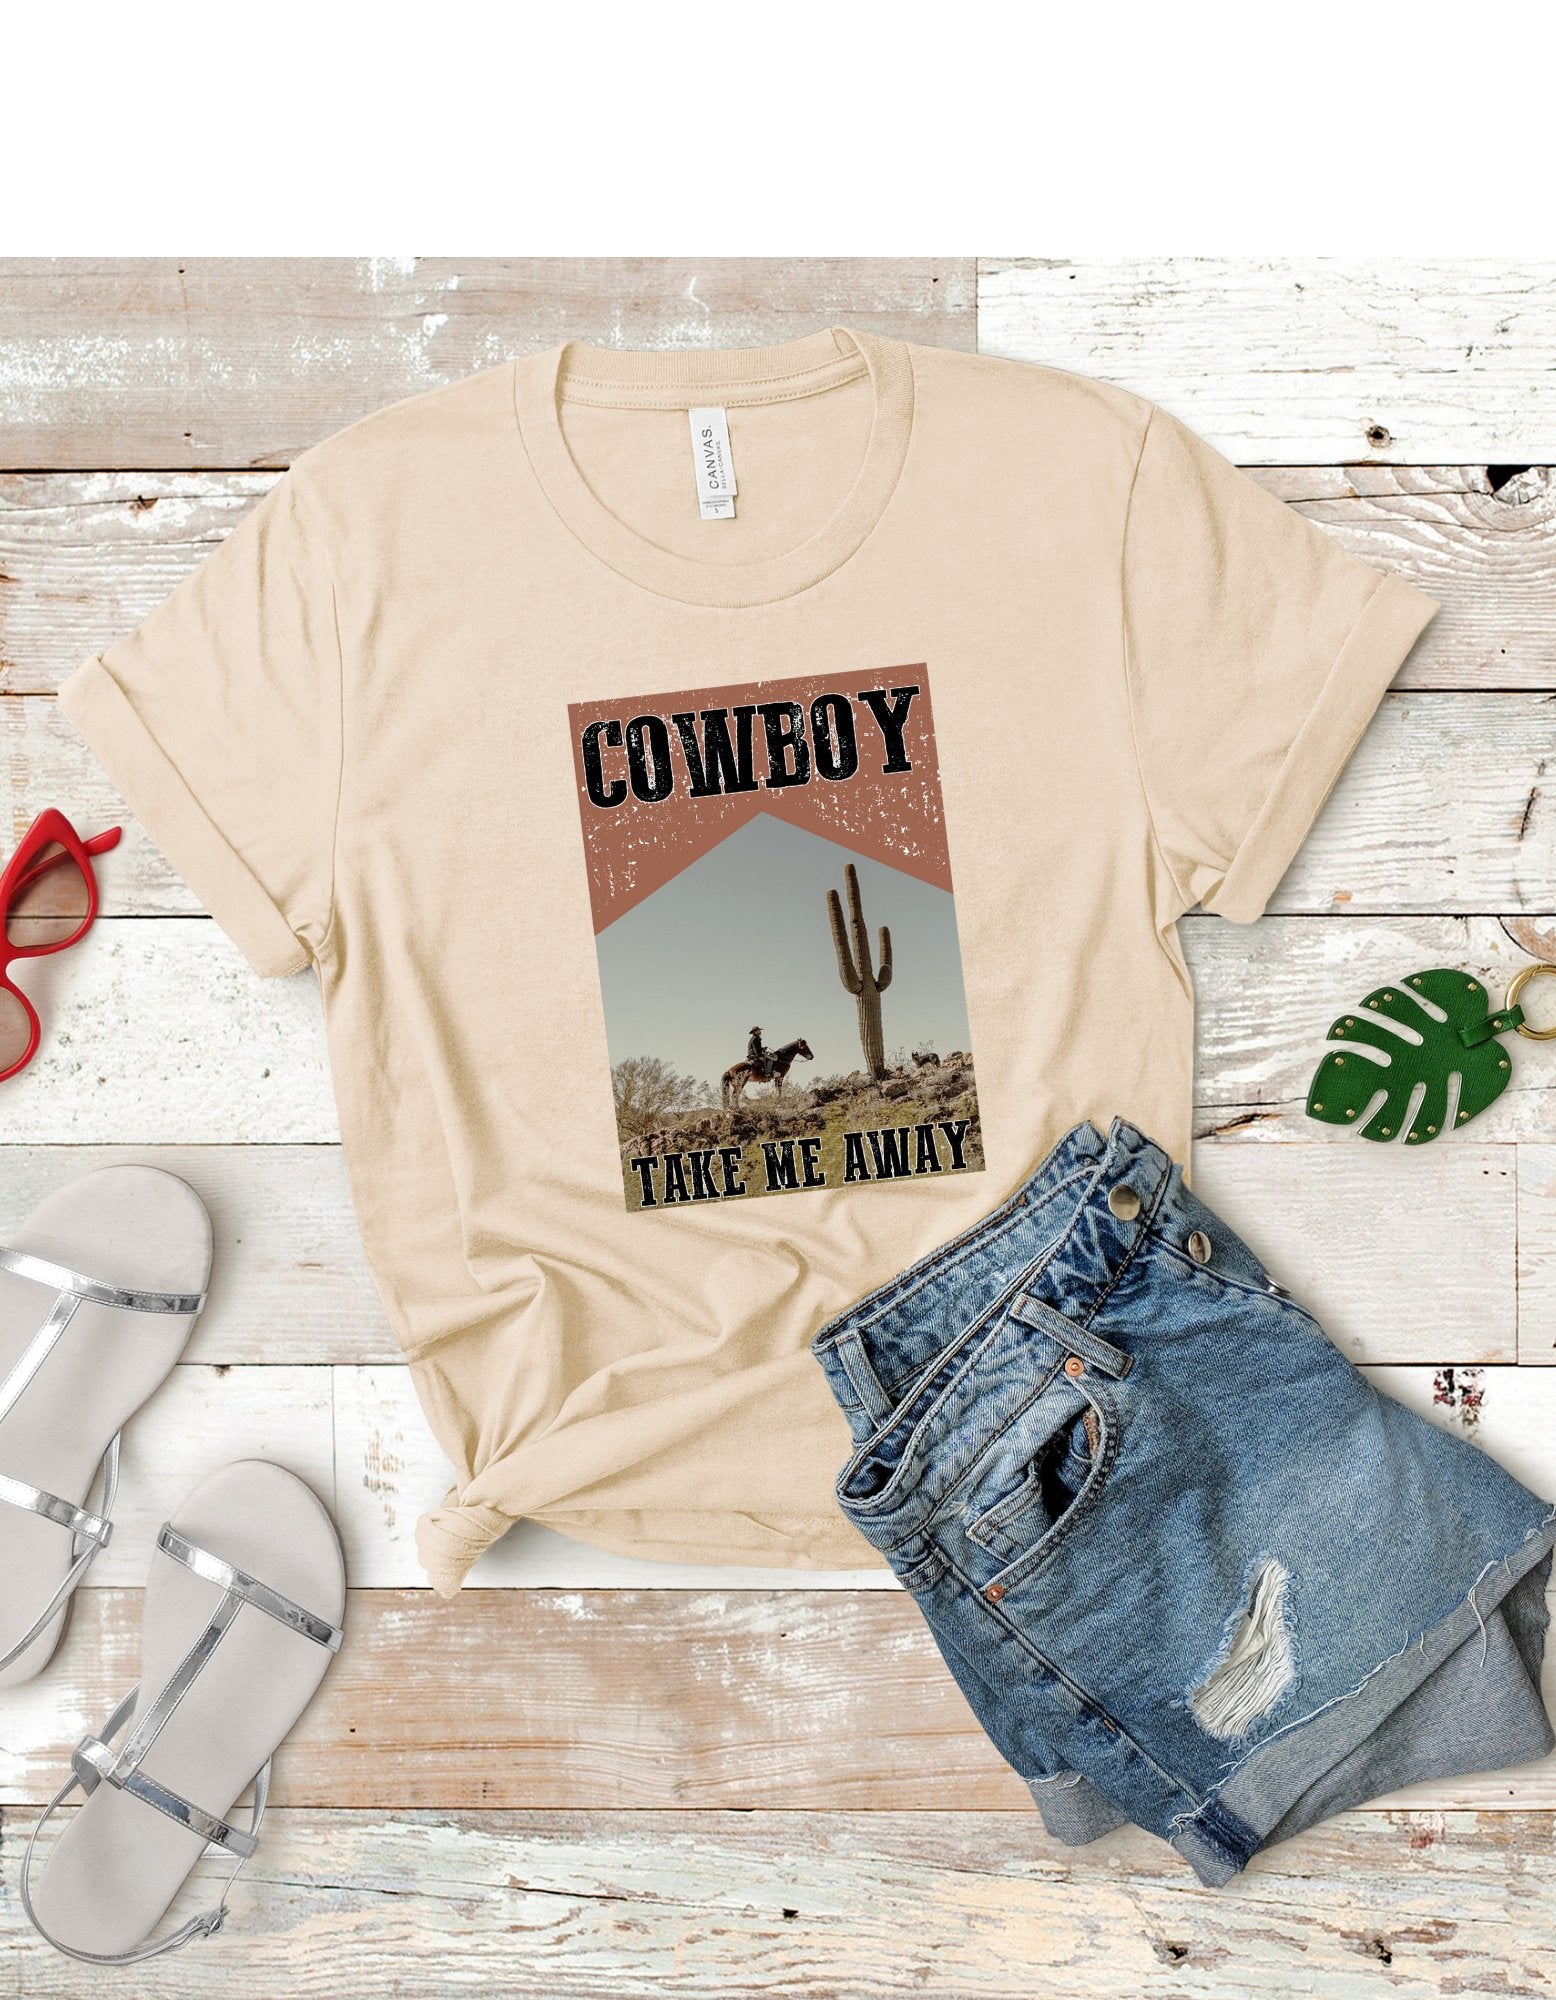 Cowboy take me away graphic tee - 4 little hearts